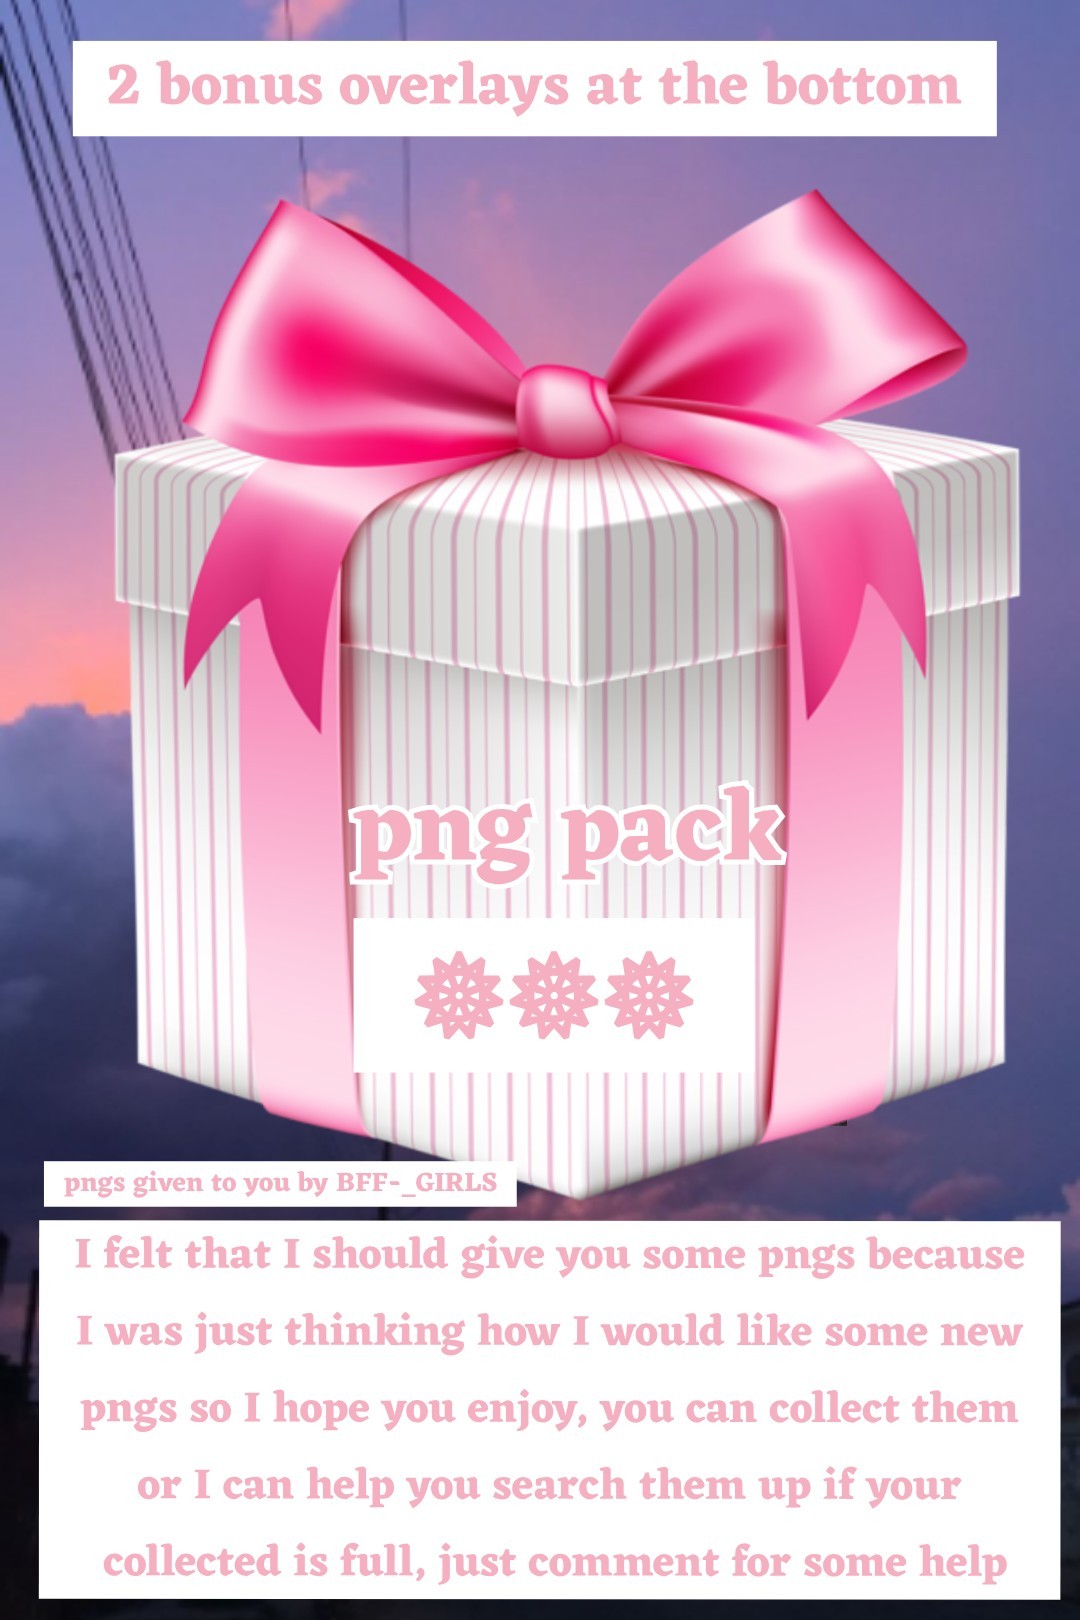 Png pack by BFF-_GIRLS with bonus overlays at the bottom 